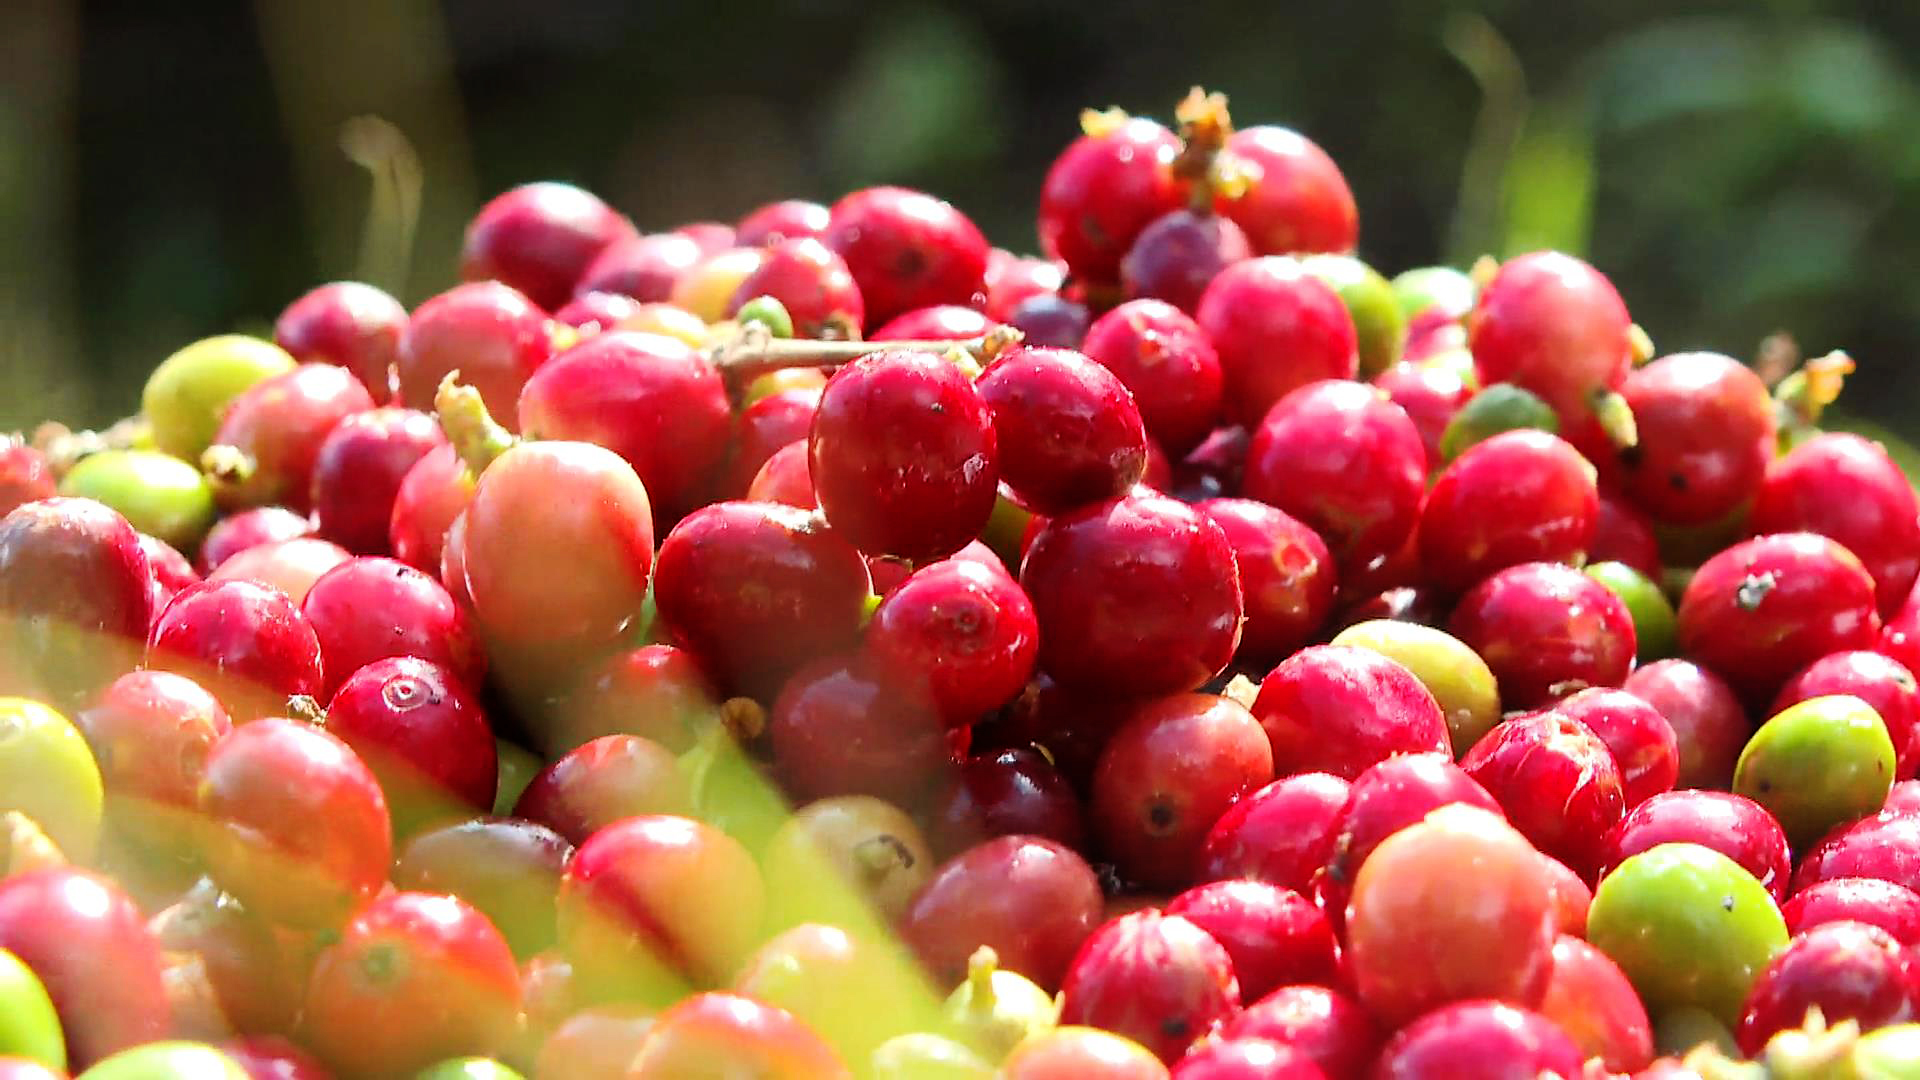 Coffee fruit: the secret super food that's about to explode | Verdict